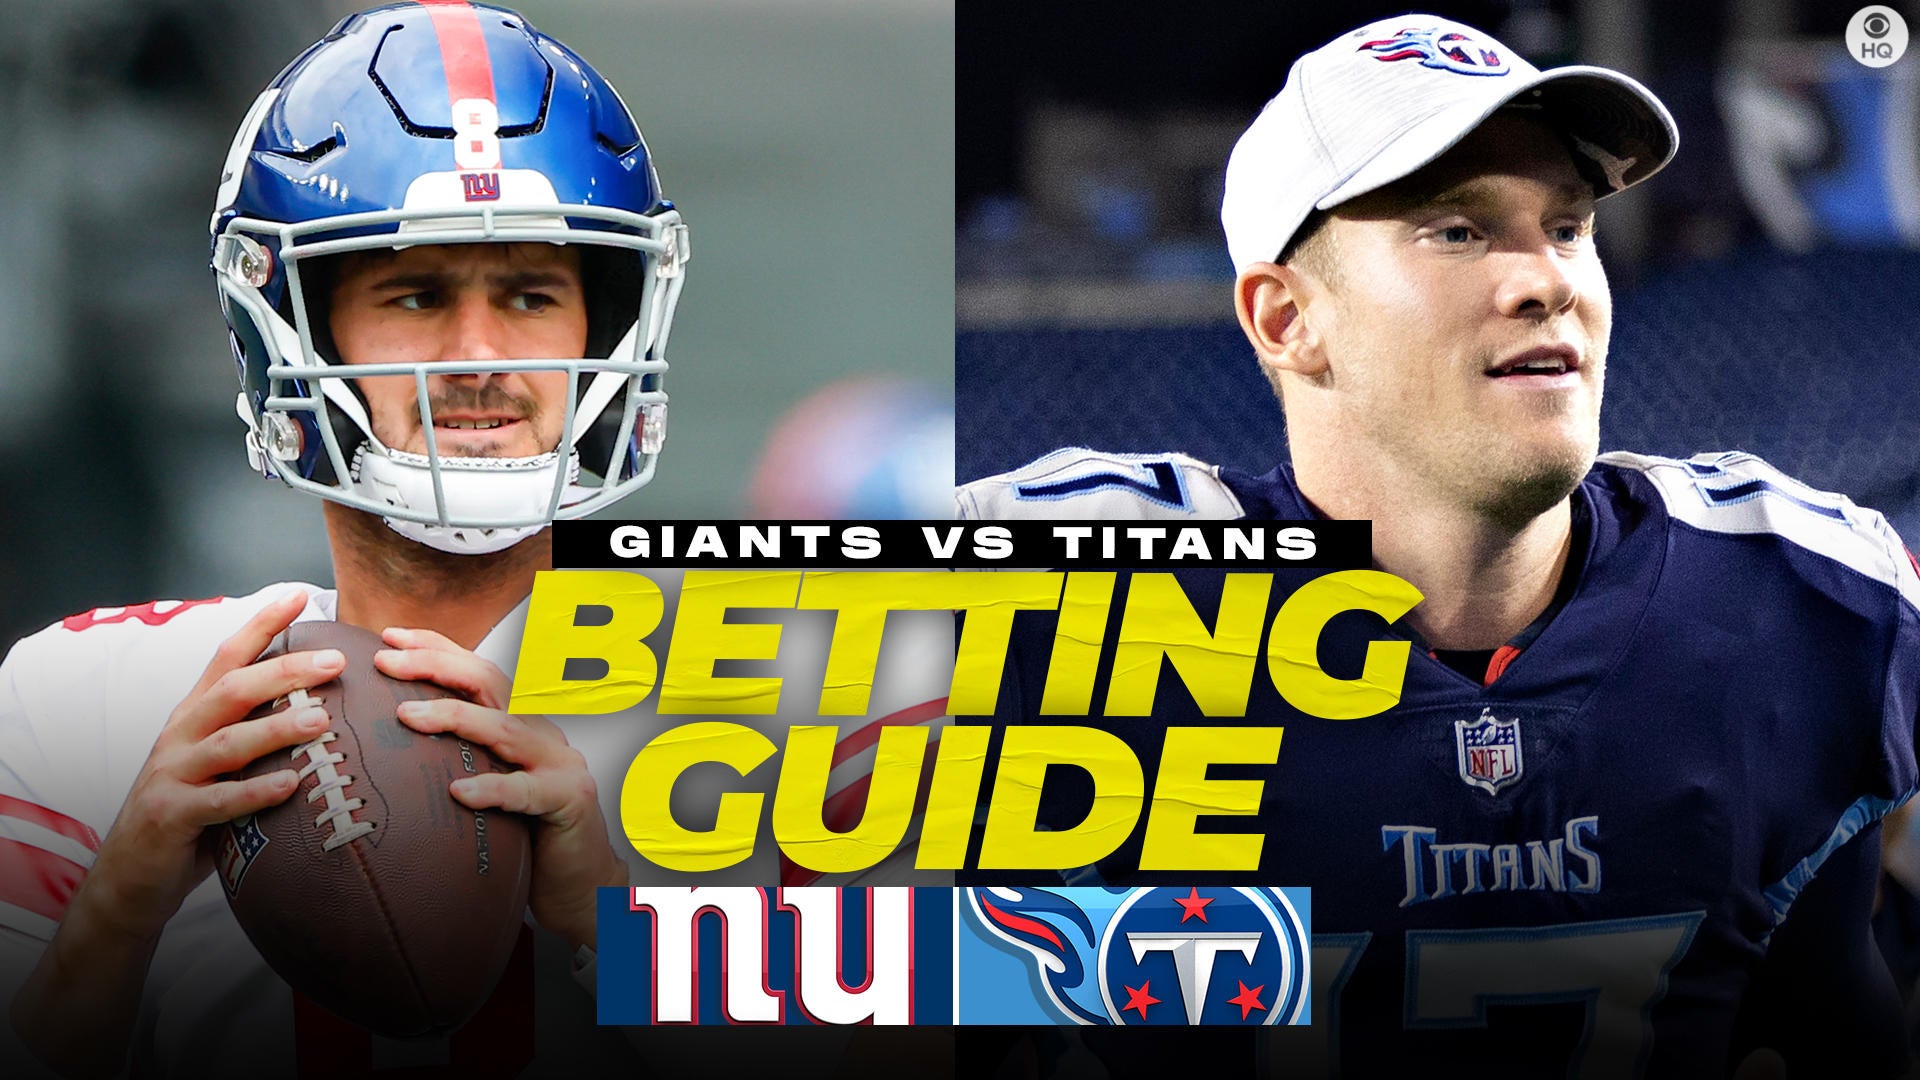 Tennessee vs. N.Y. Giants Live Stream of National Football League - CBSSports.com